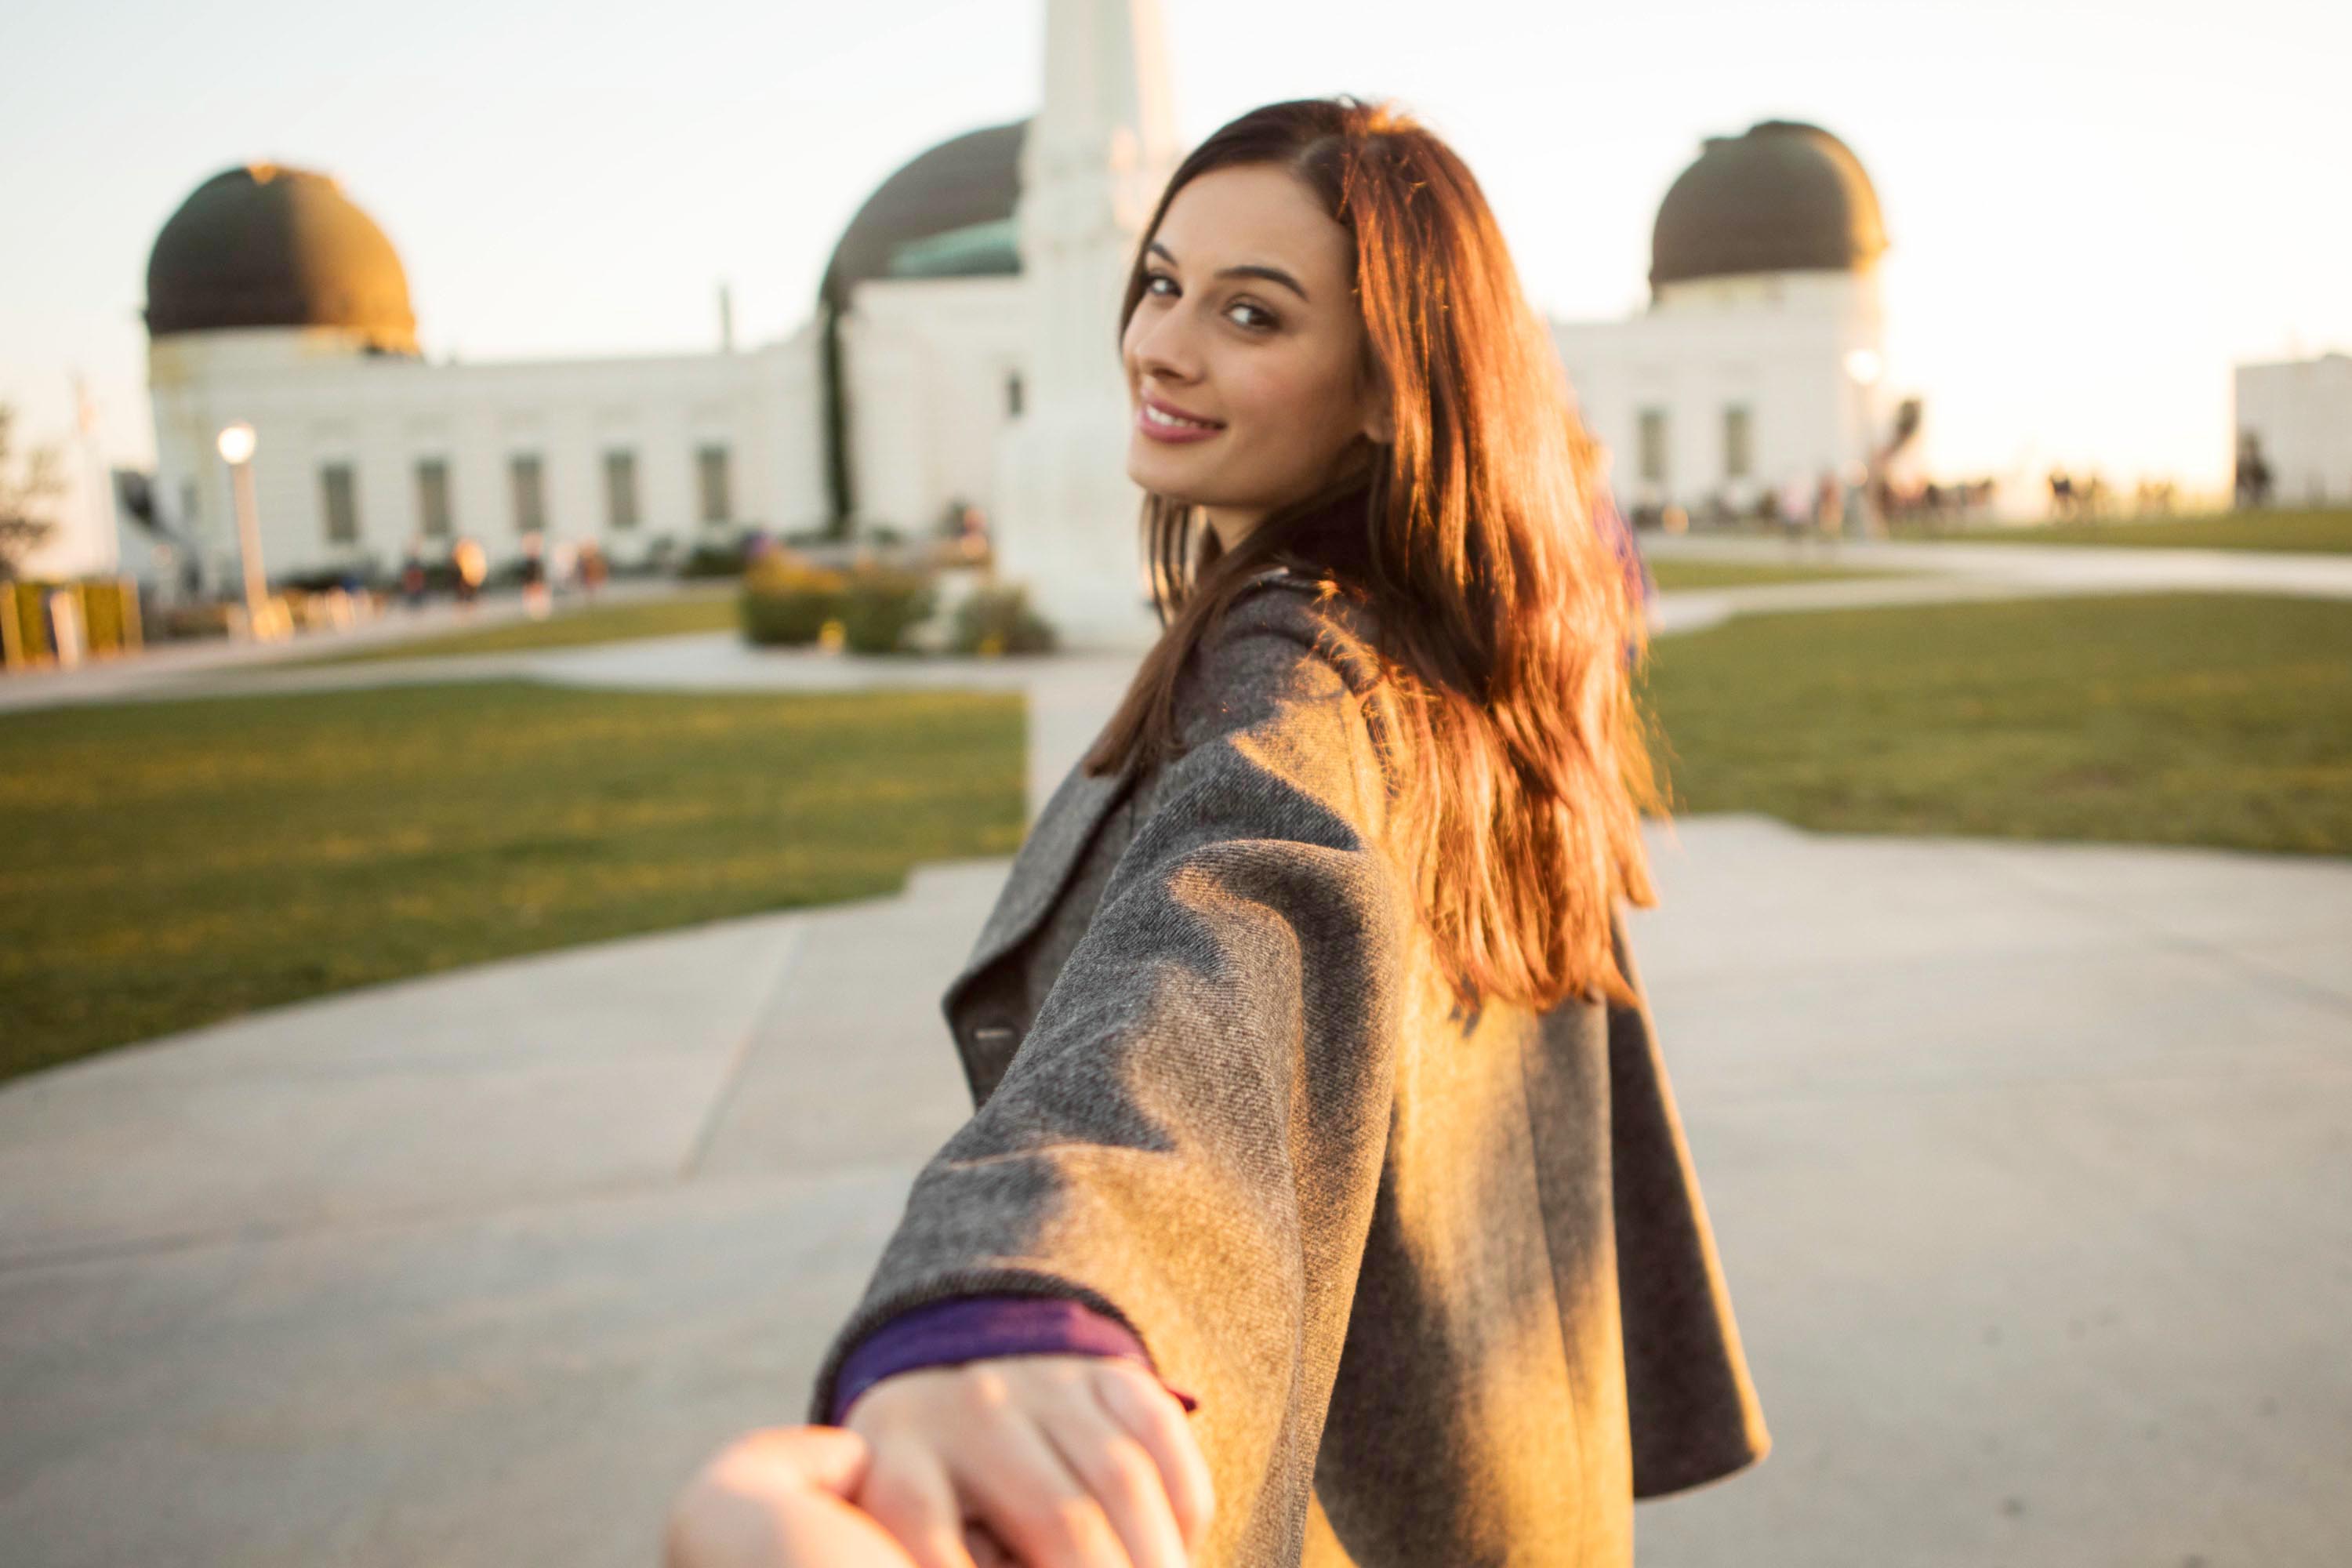 A file pic of Evelyn Sharma holding hands at the Griffith Observatory in LA.